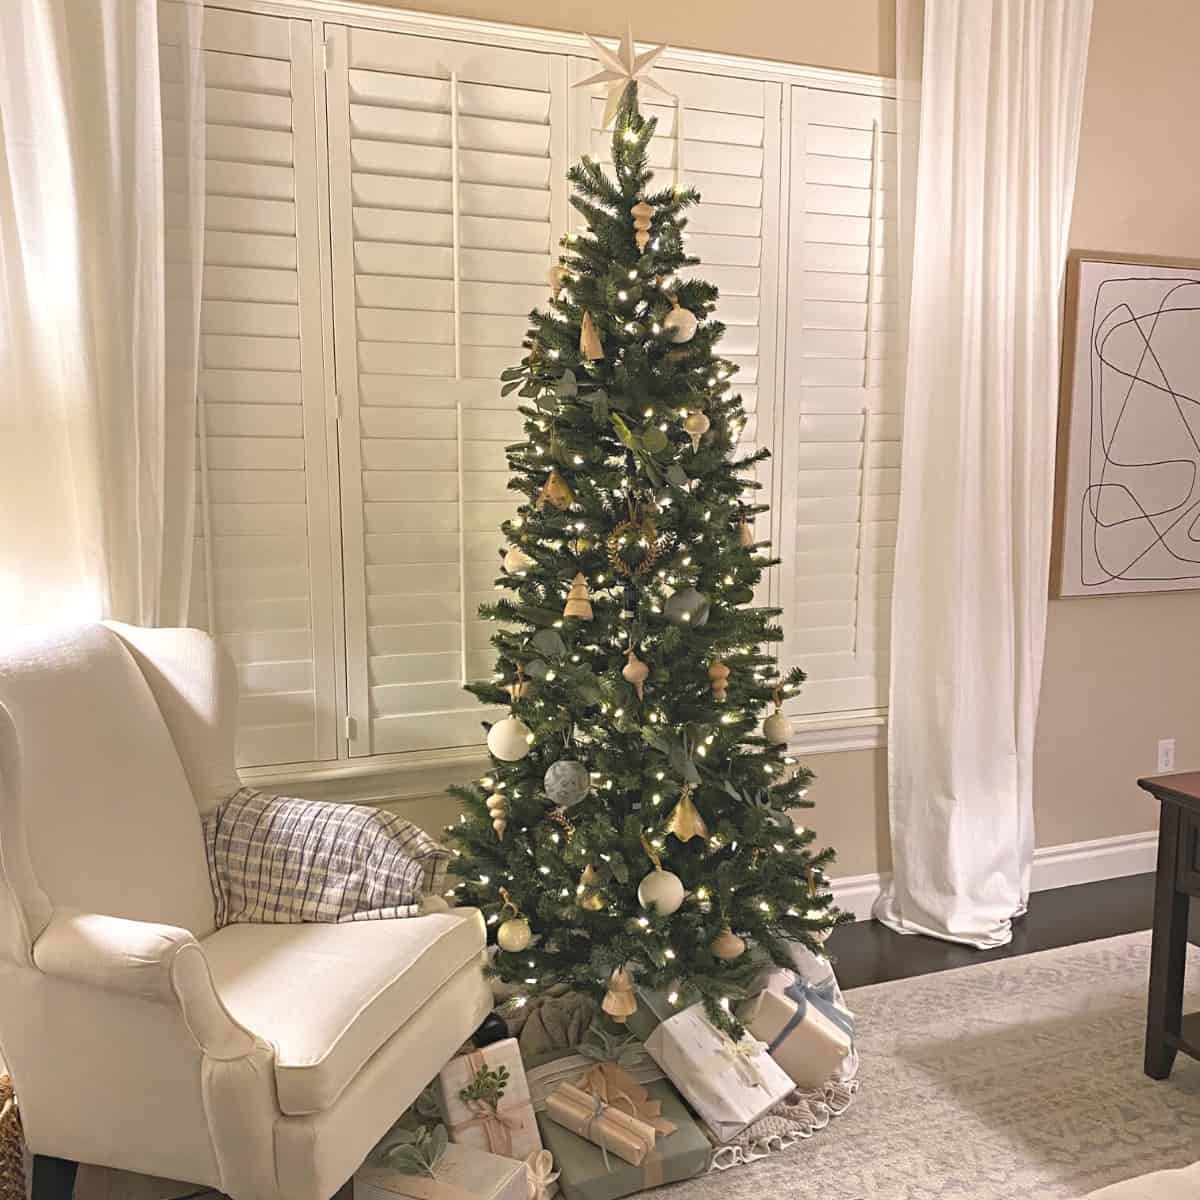 A decorated pre-lit Christmas tree with neutral ornaments placed in the front window of a living room